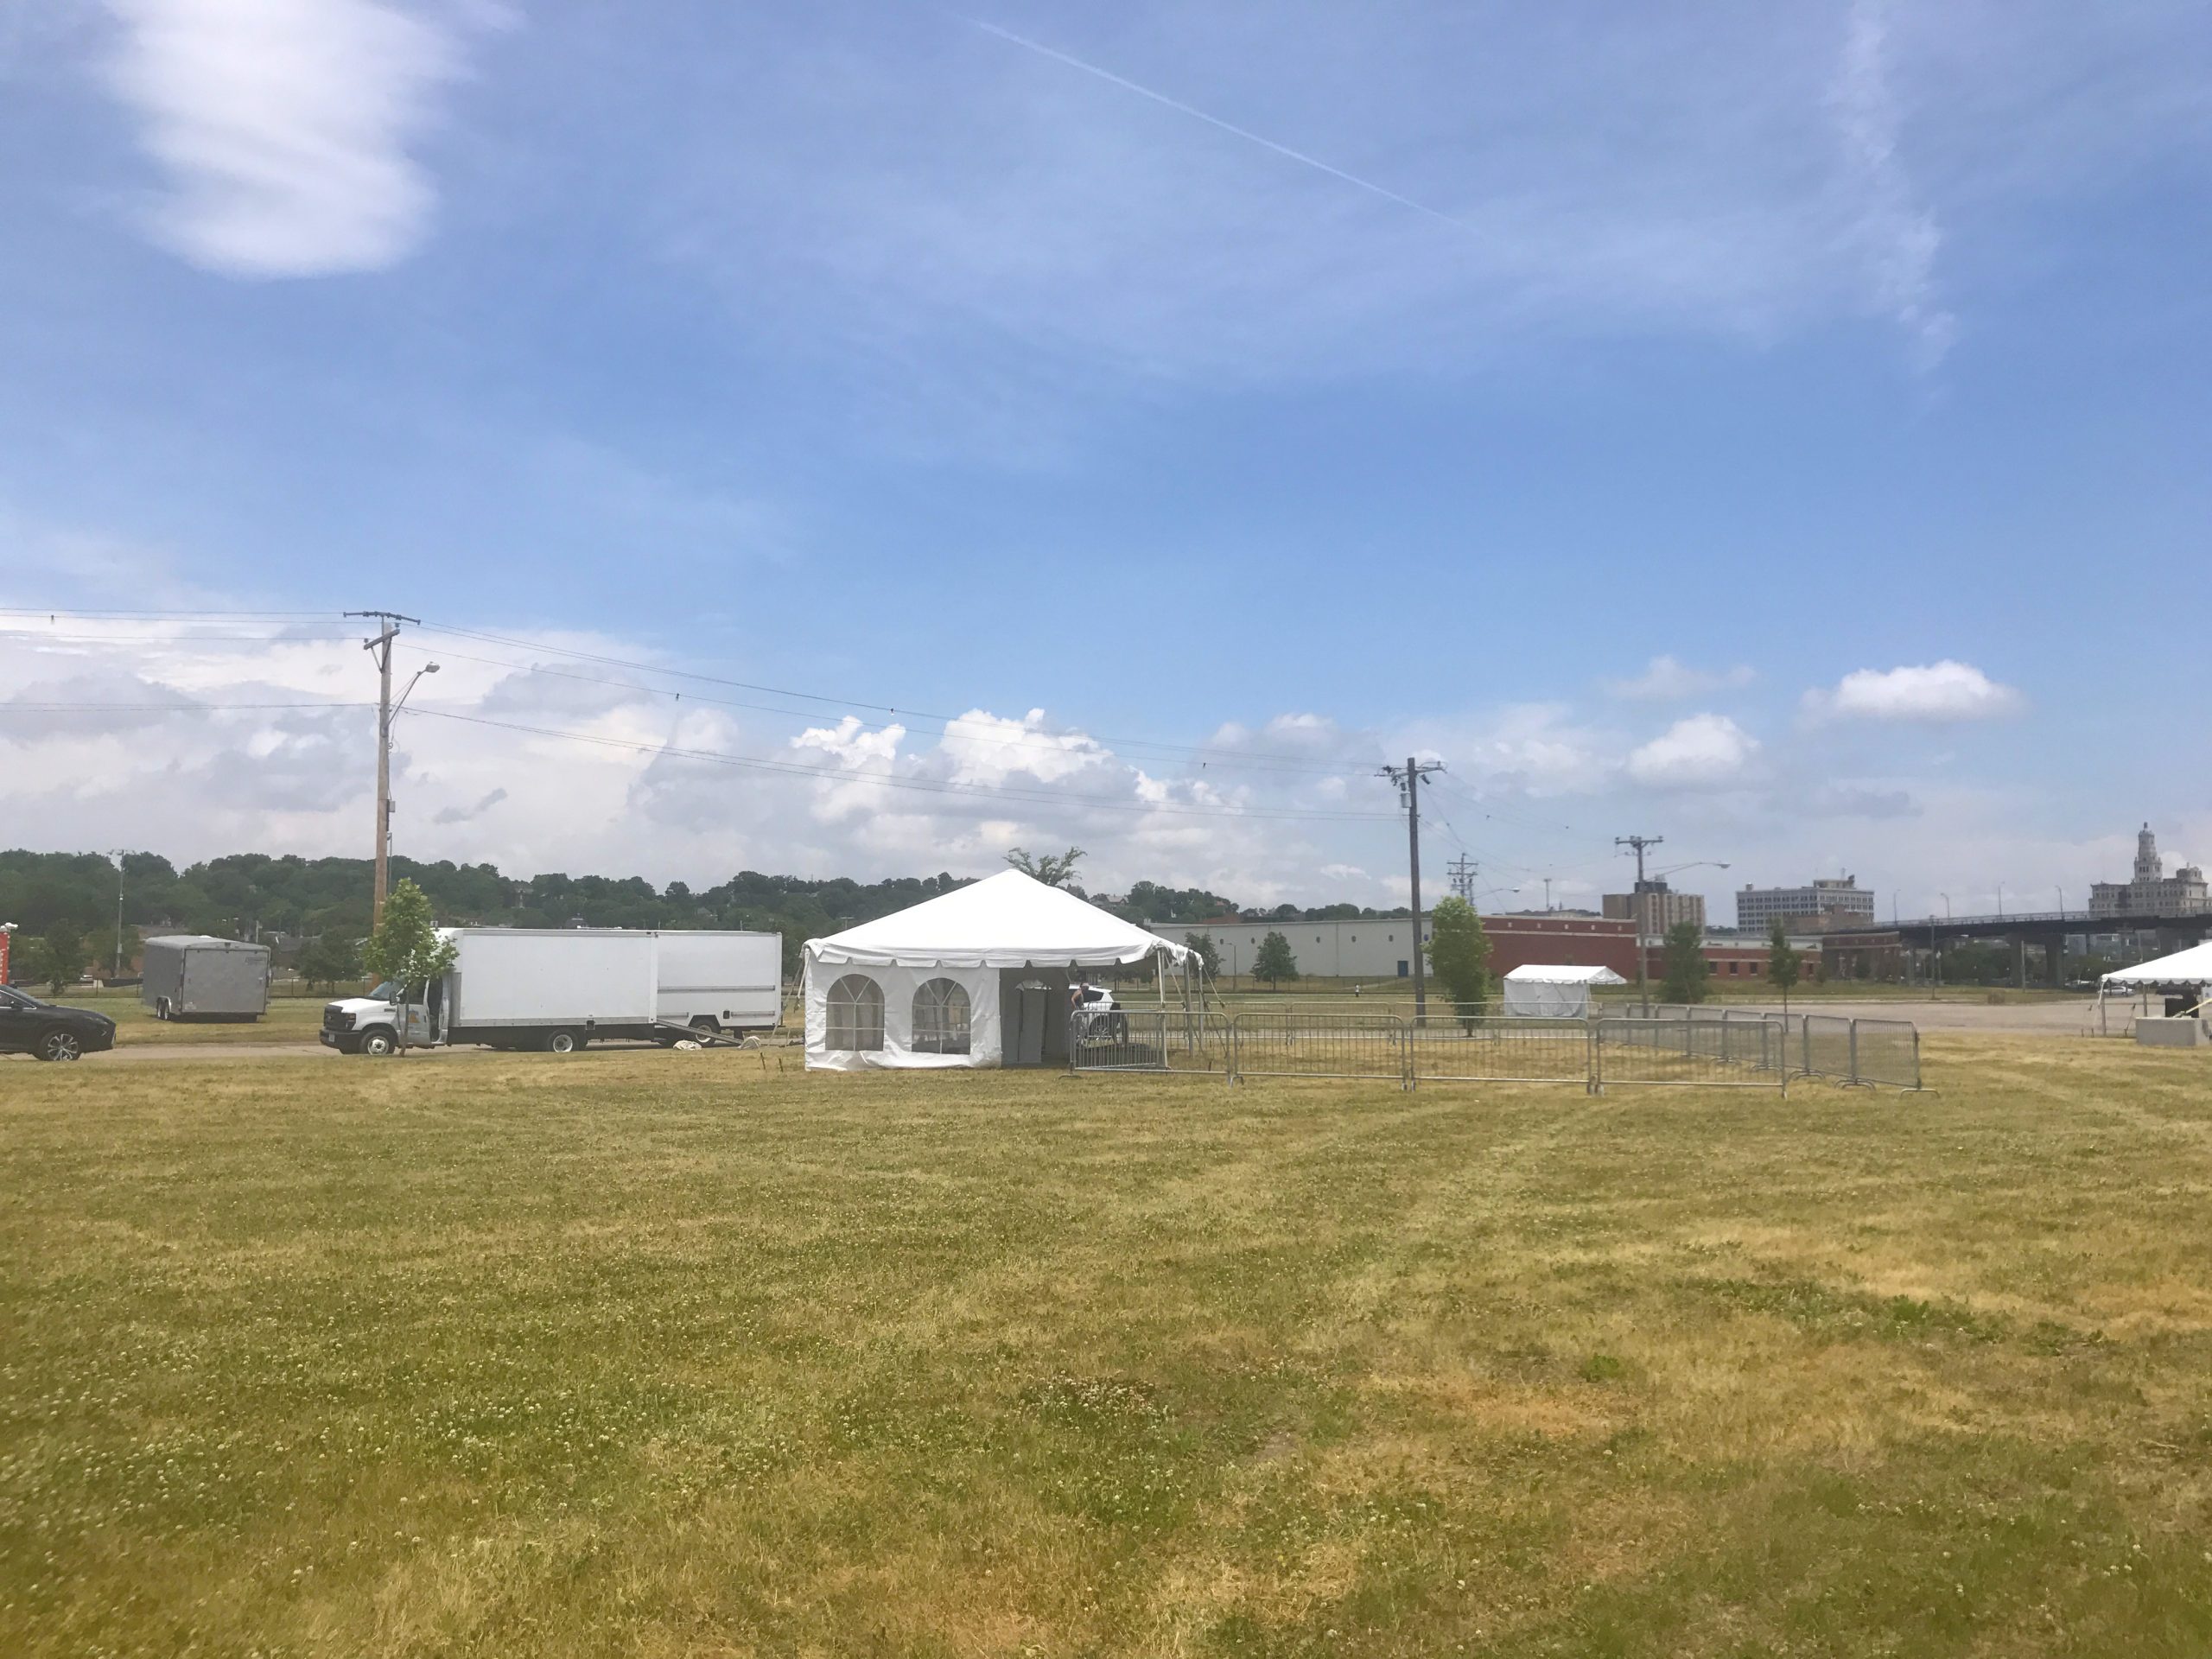 20' x 40' frame tent with side walls for The Muddy Fest in Davenport, Iowa